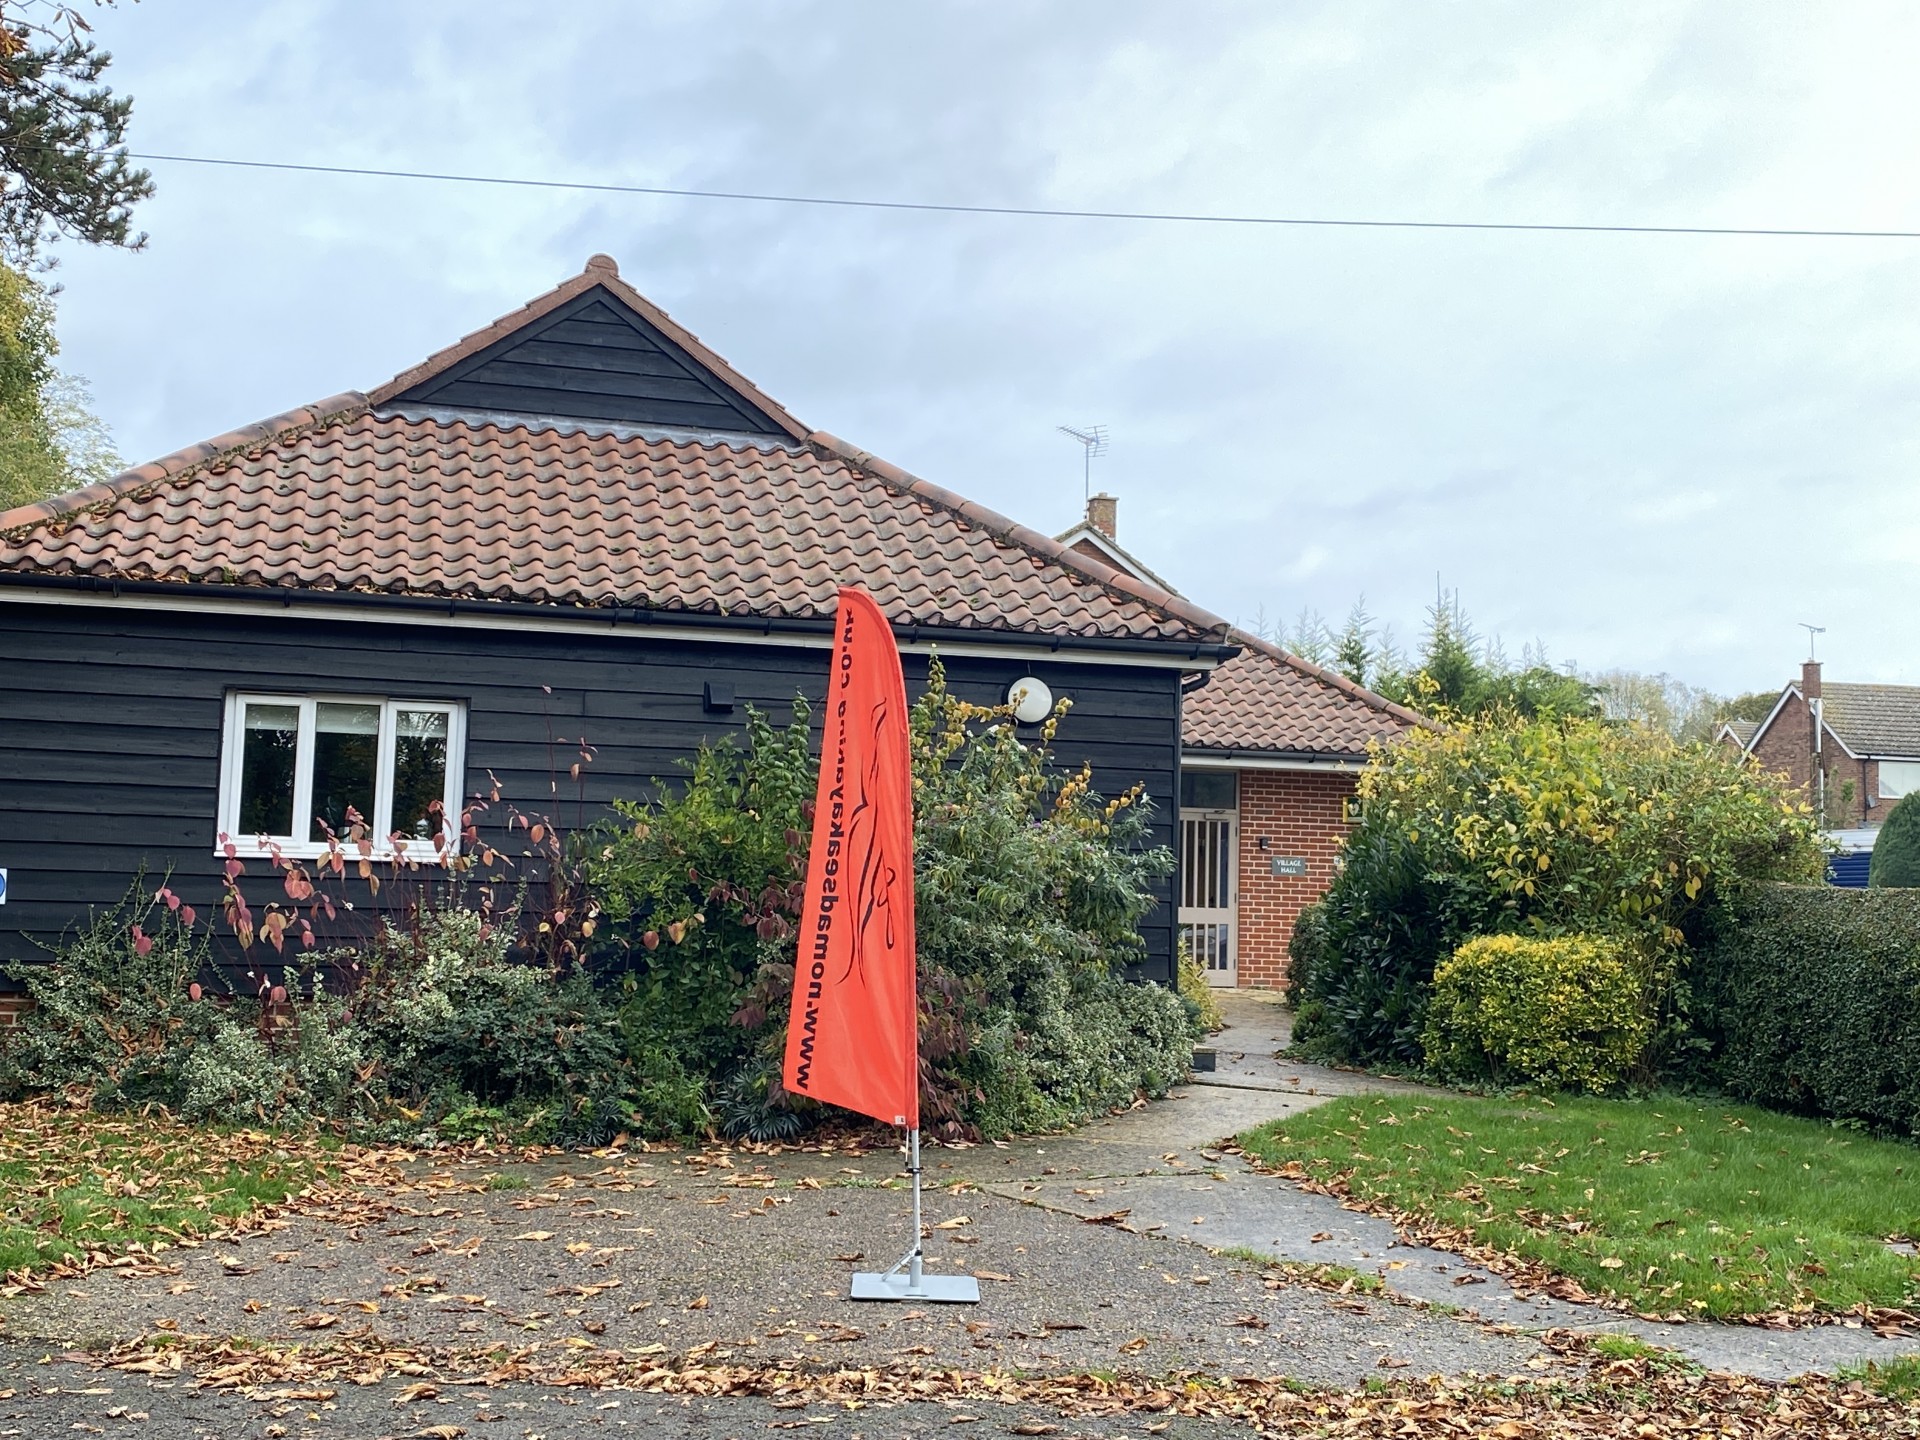 A village hall with a tall orange flag outside